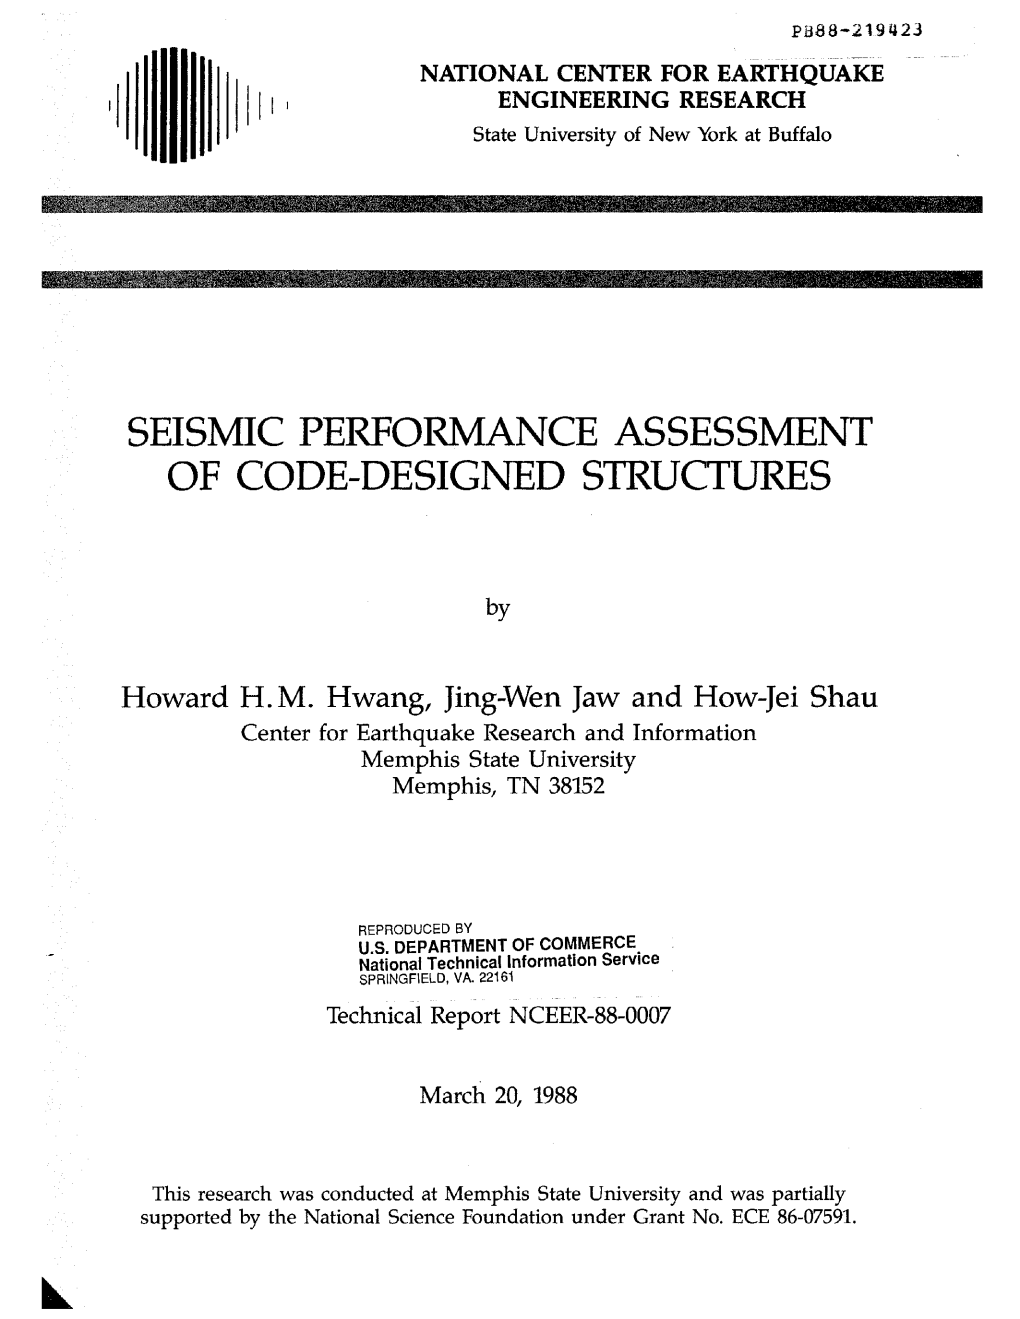 Seismic Performance Assessment of Code-Designed Structures